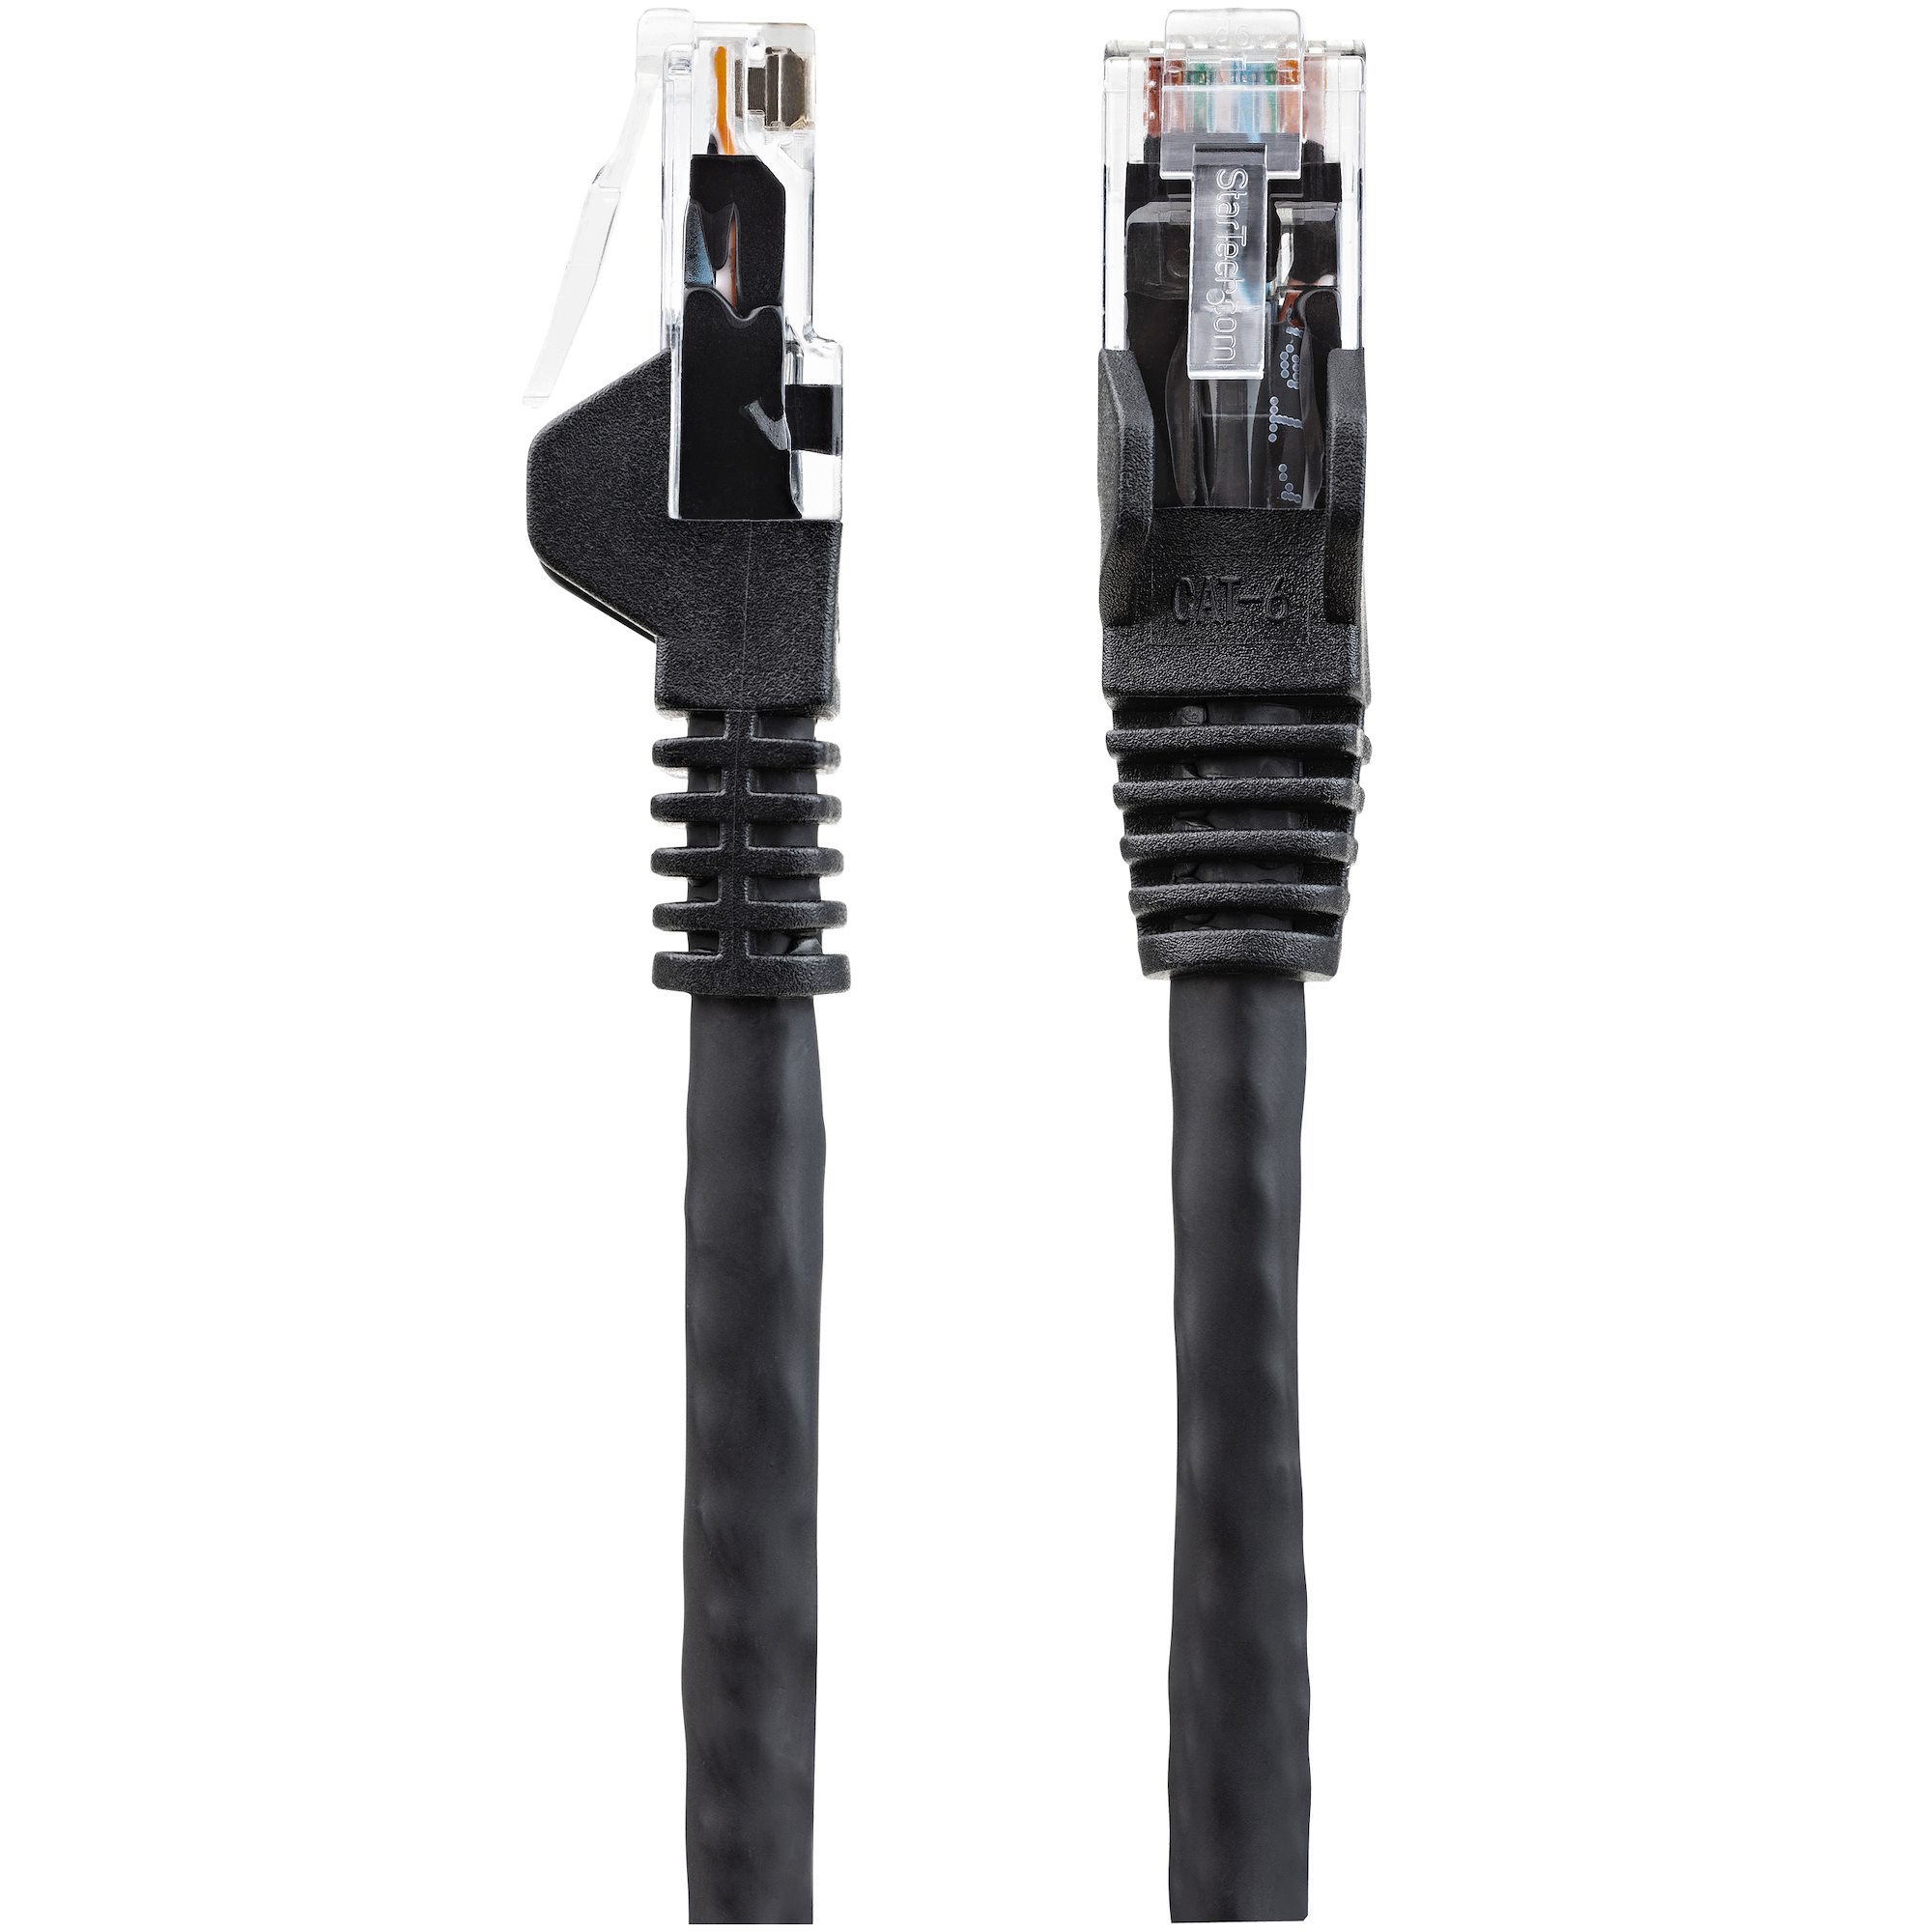 Startech.Com 25 Ft Red Snagless Cat6 Utp Patch Cable 1 X Rj-45 Male Network Red Product Category: Hardware Connectivity/Connector Cables 1 X Rj-45 Male Network Category 6-25 Ft